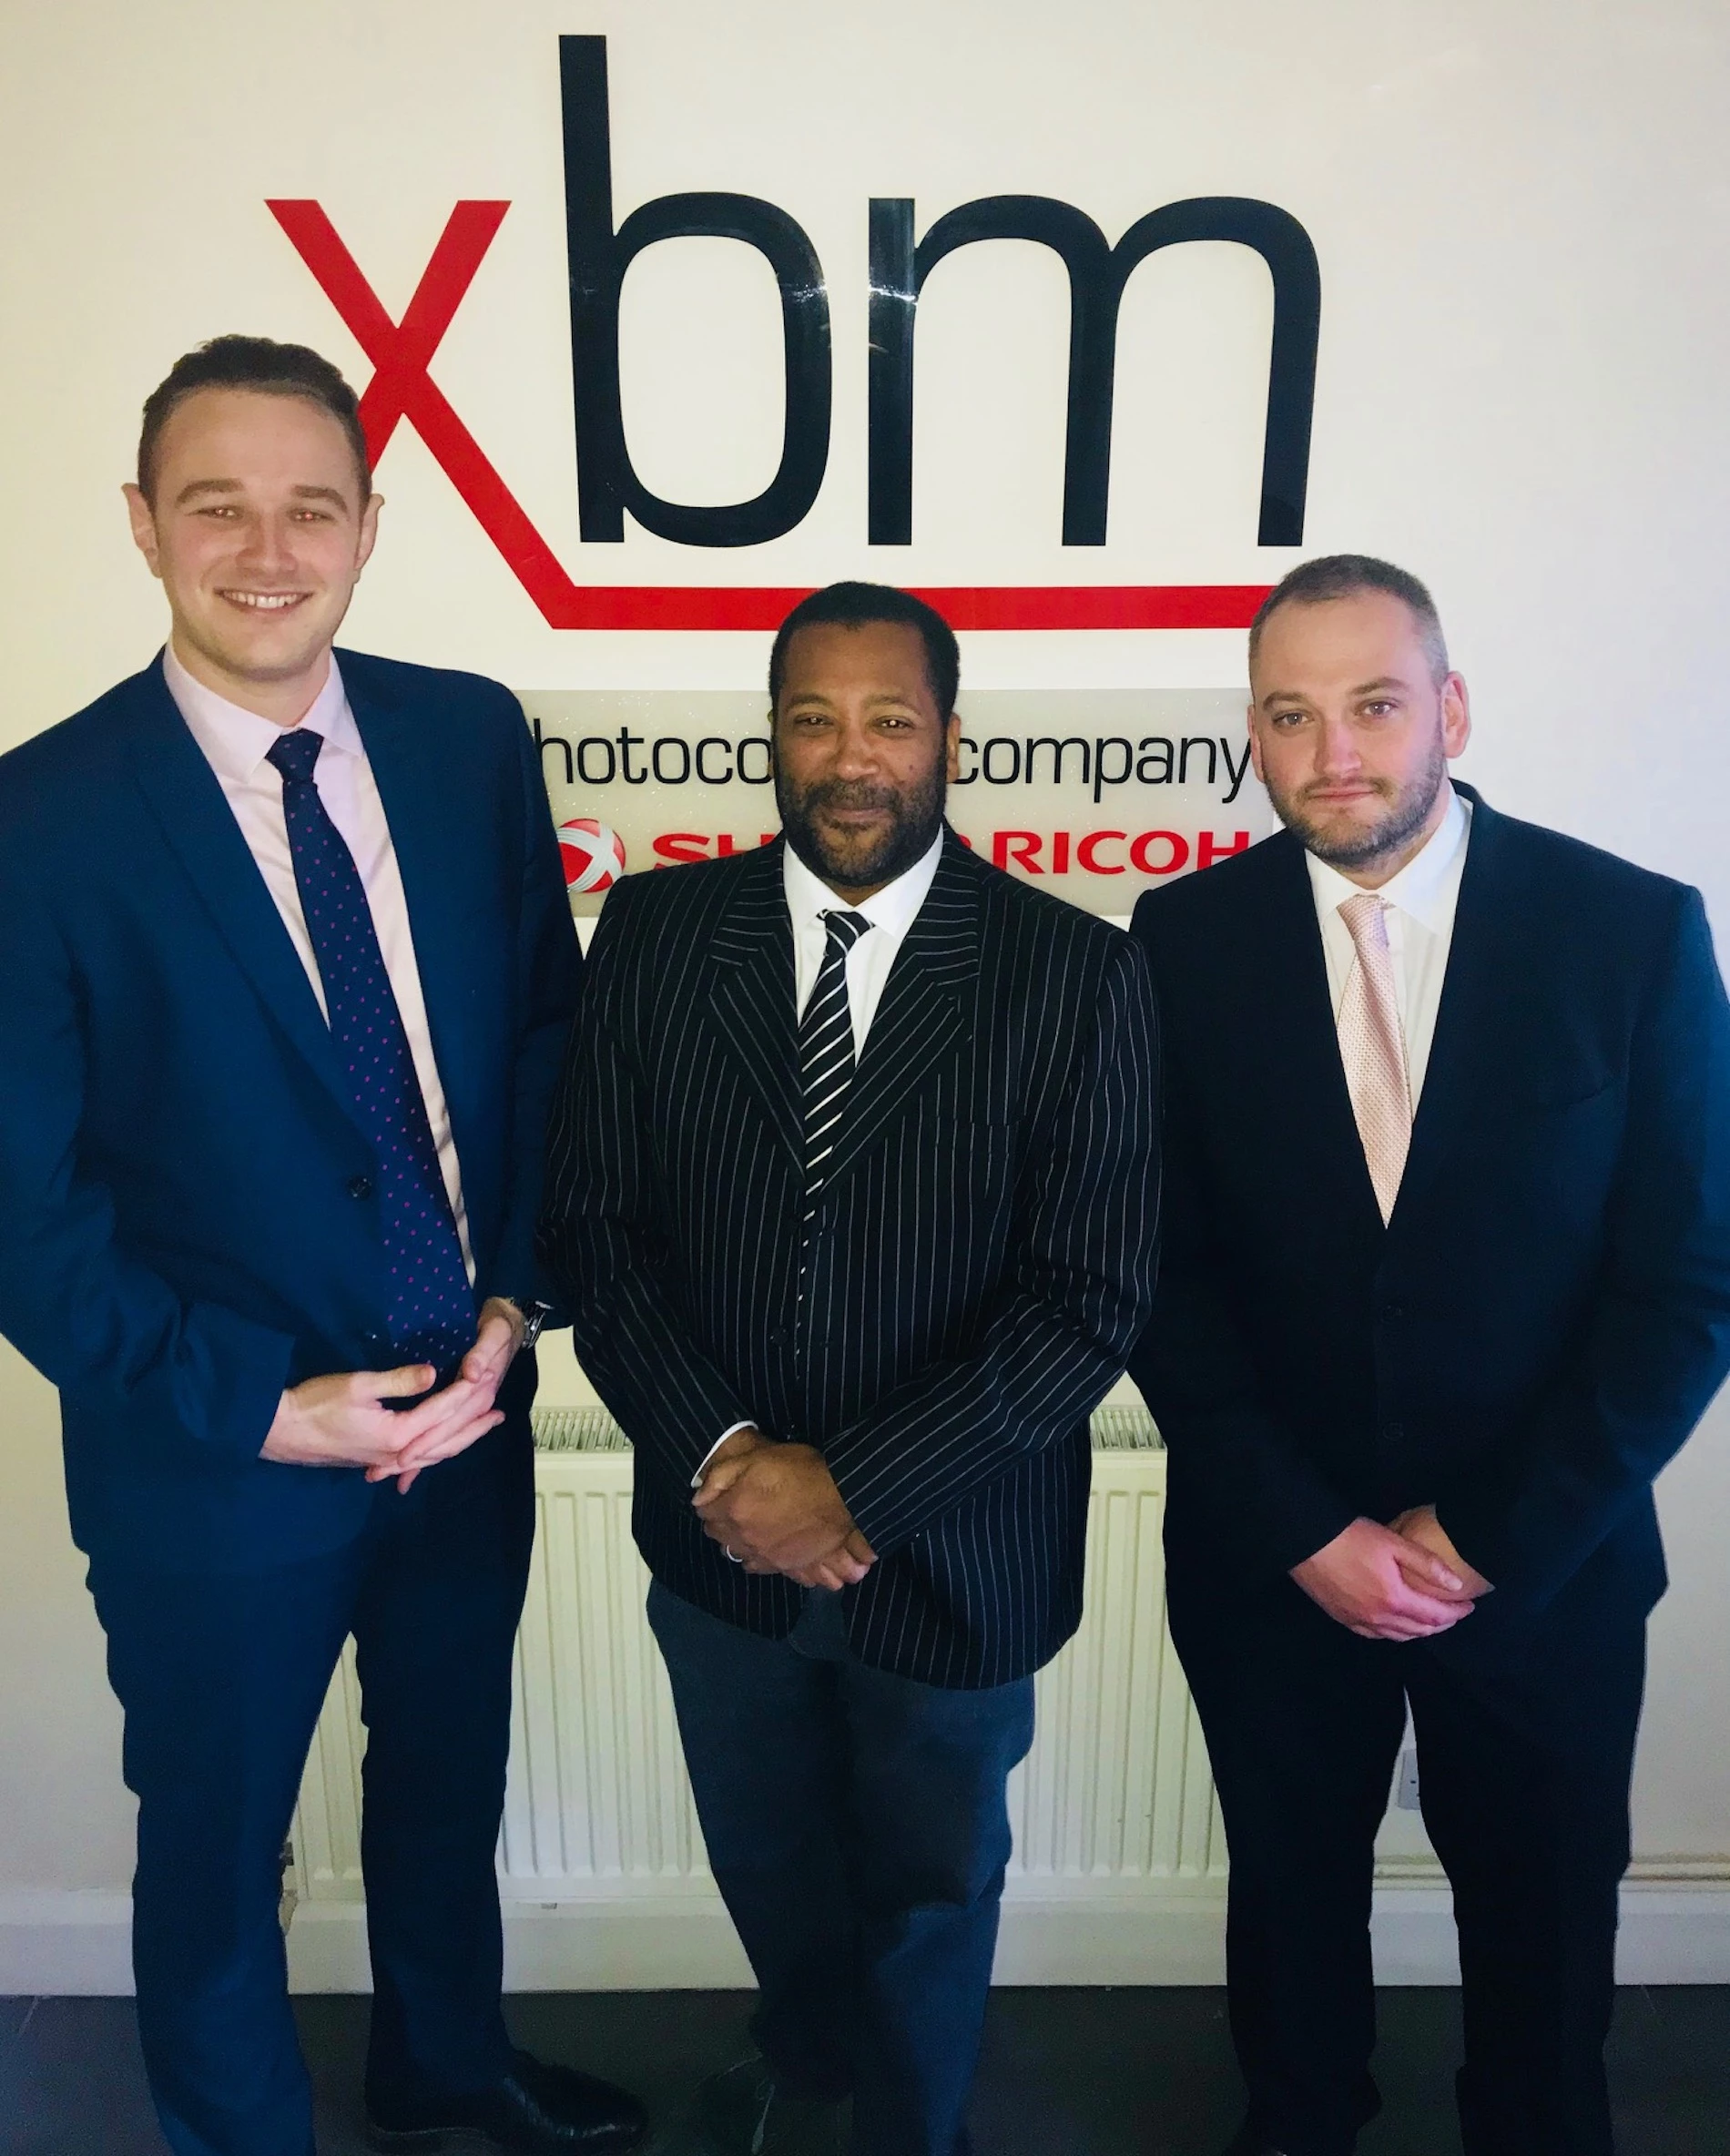 William Islip, Senior Relationship Manager at NatWest, Justin English, Managing Director at XBM Limited and Richard Taylor, Director at XBM.